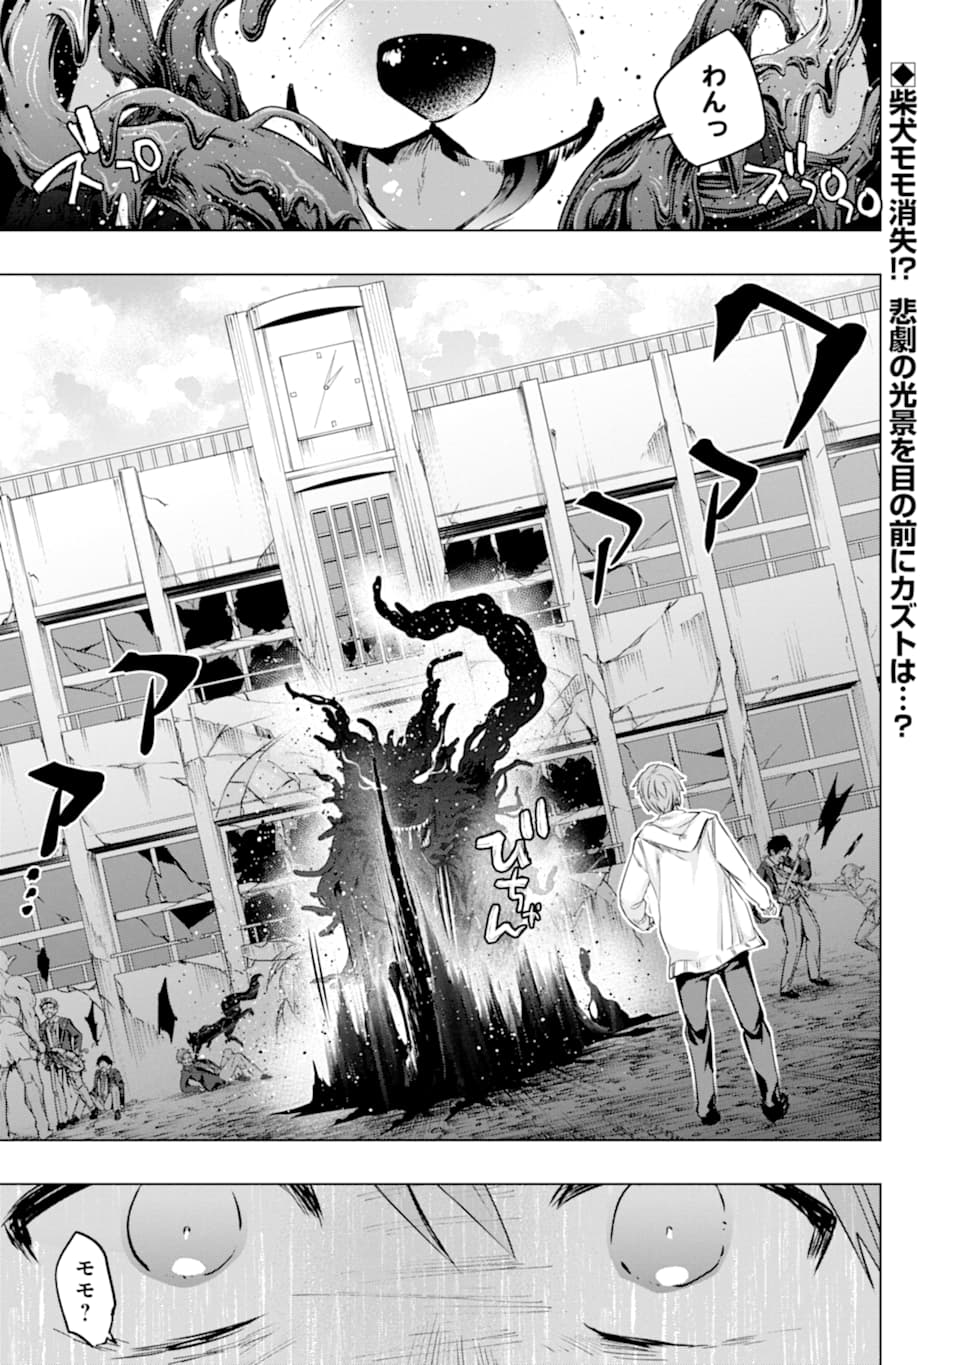 Read The World Is Full Of Monsters Now, Therefor I Want To Live As I Wish  Chapter 5: Hardware Raid on Mangakakalot